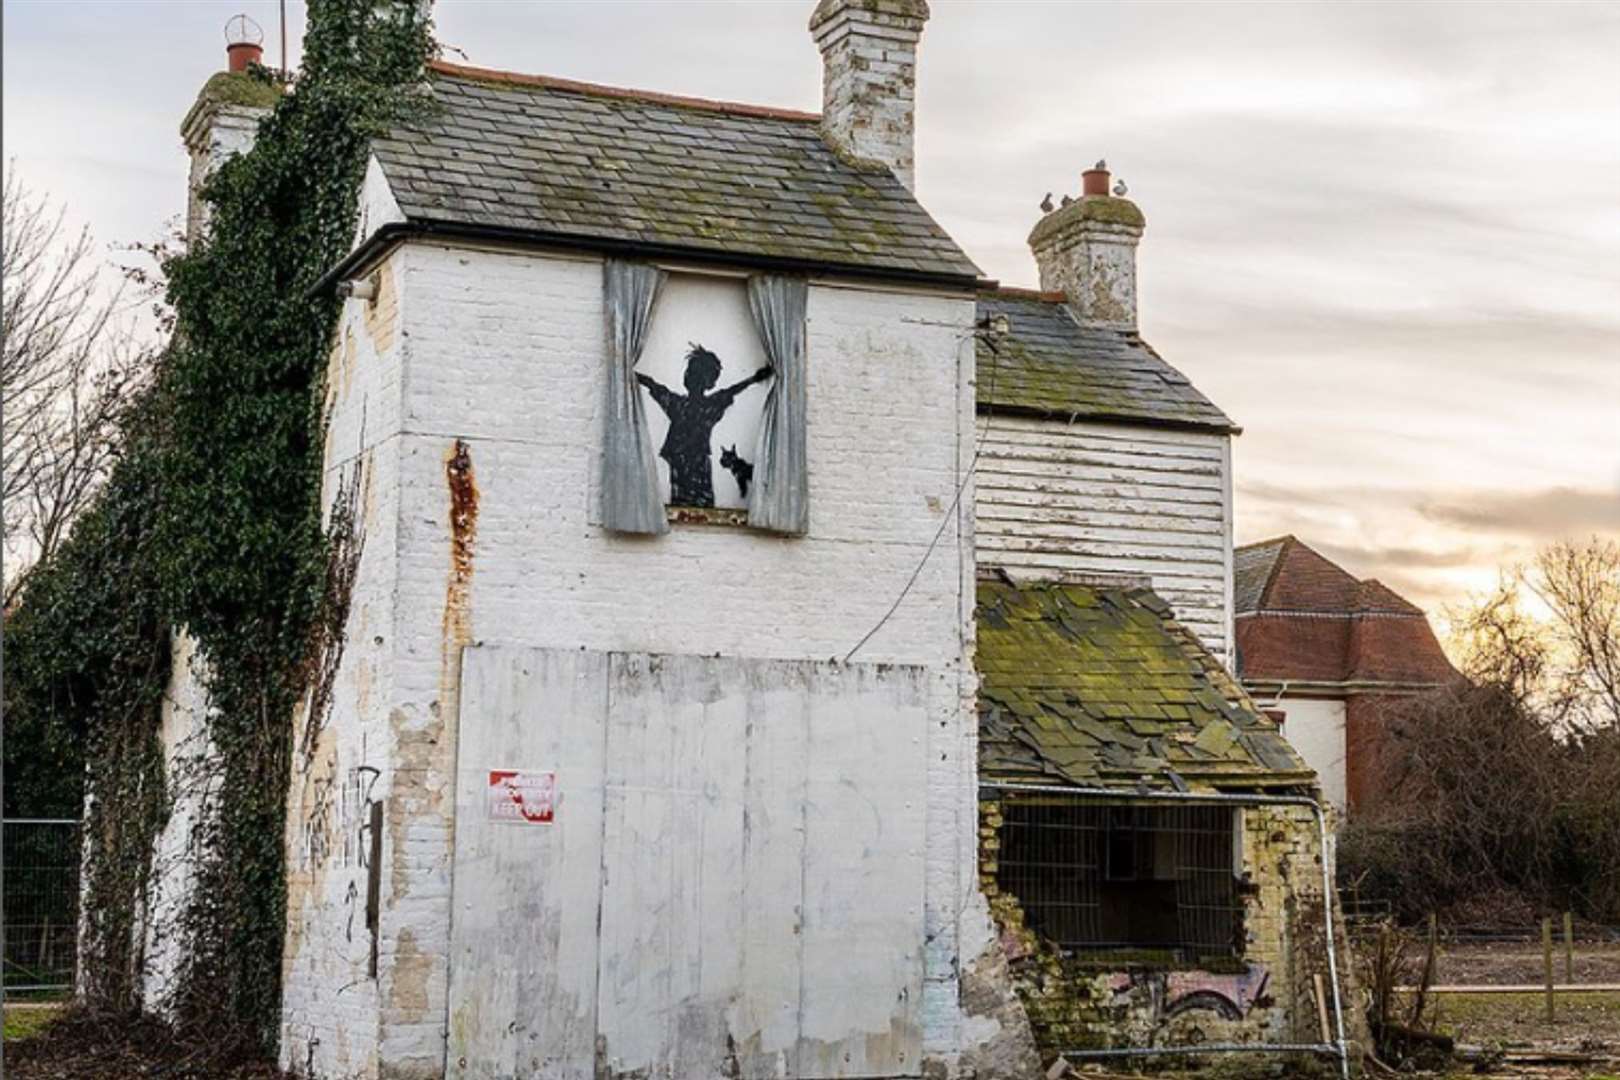 The piece shows a silhouette of a boy opening a set of curtains with a cat next to him. Picture: Banksy via Instagram